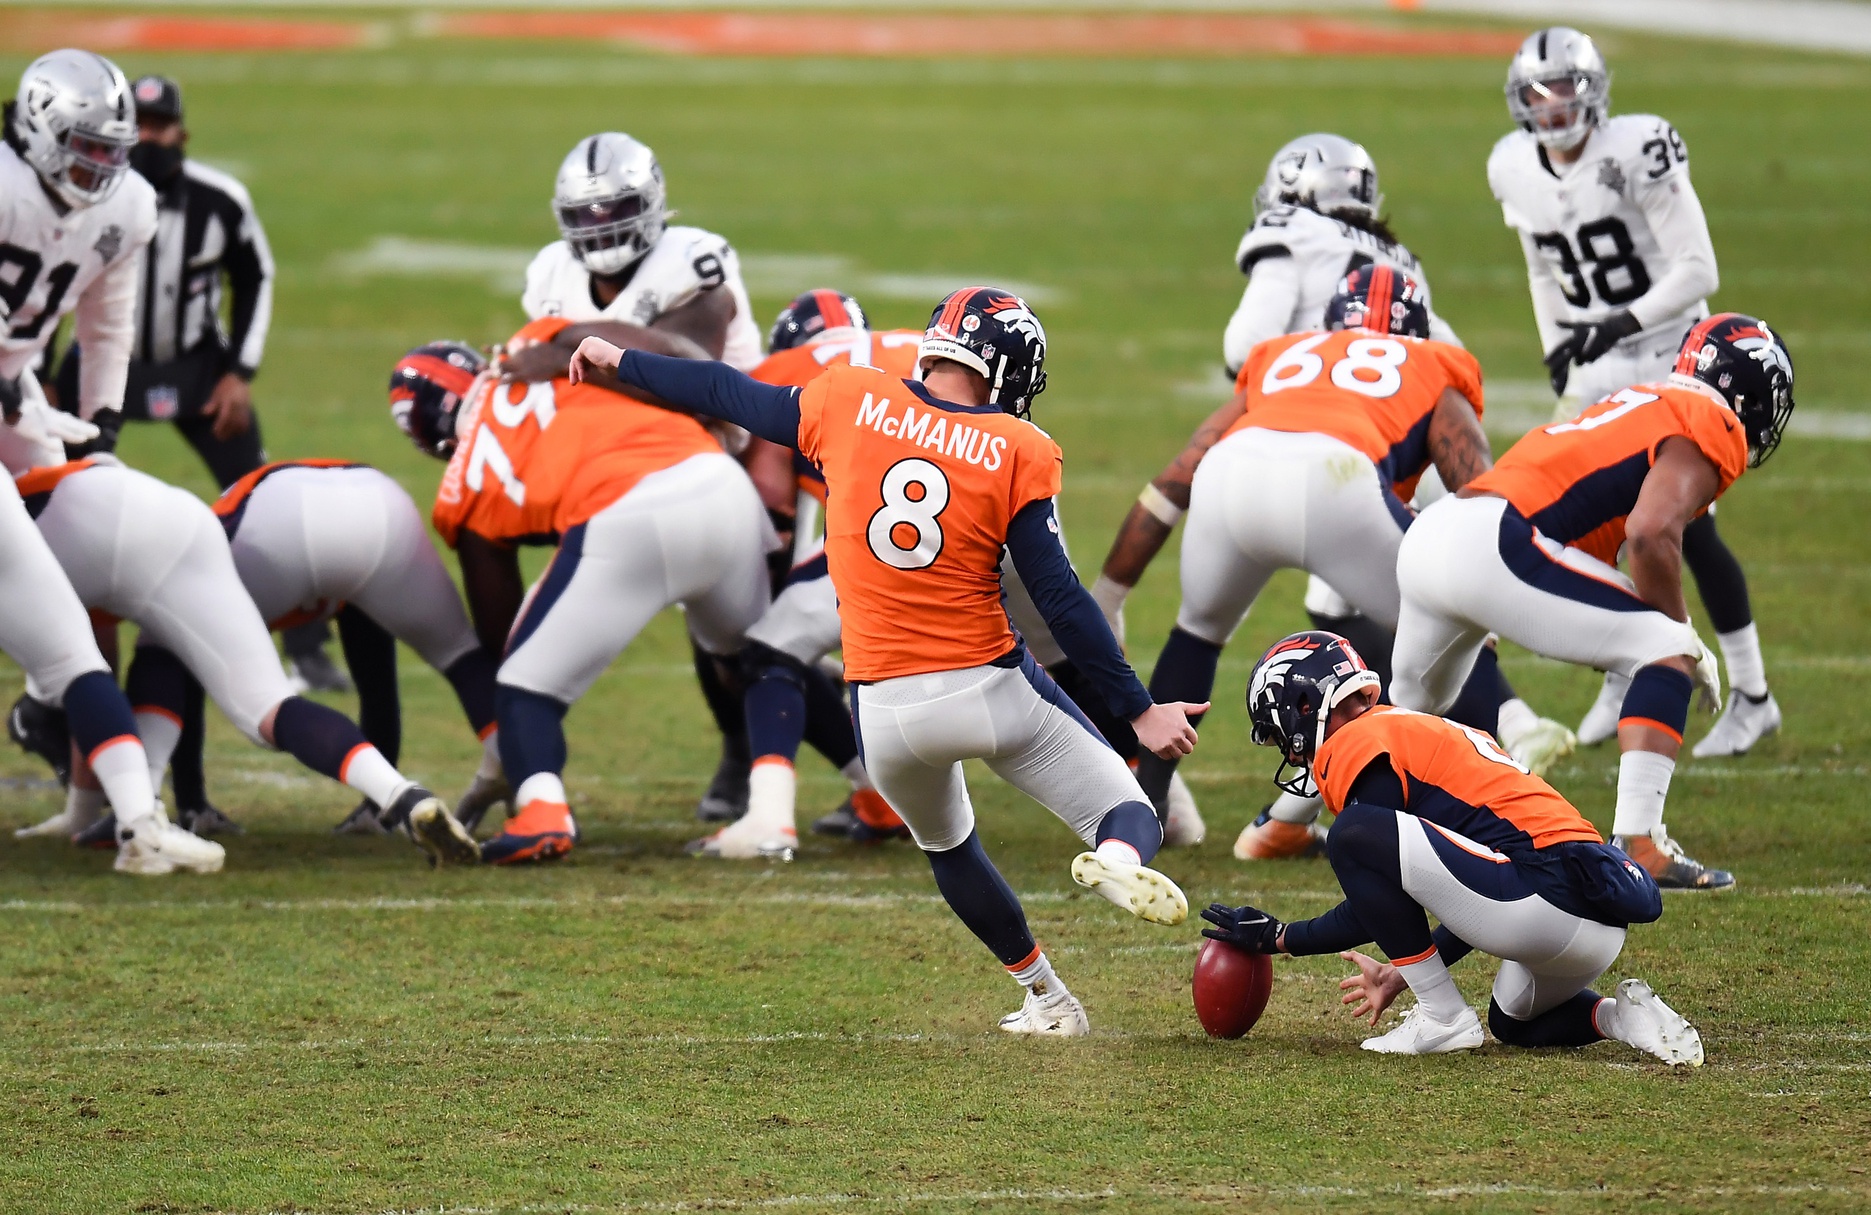 Denver Broncos kicker Brandon McManus (8) attempts a field goal against the Las Vegas Raiders during the second quarter at Empower Field in Mile High.